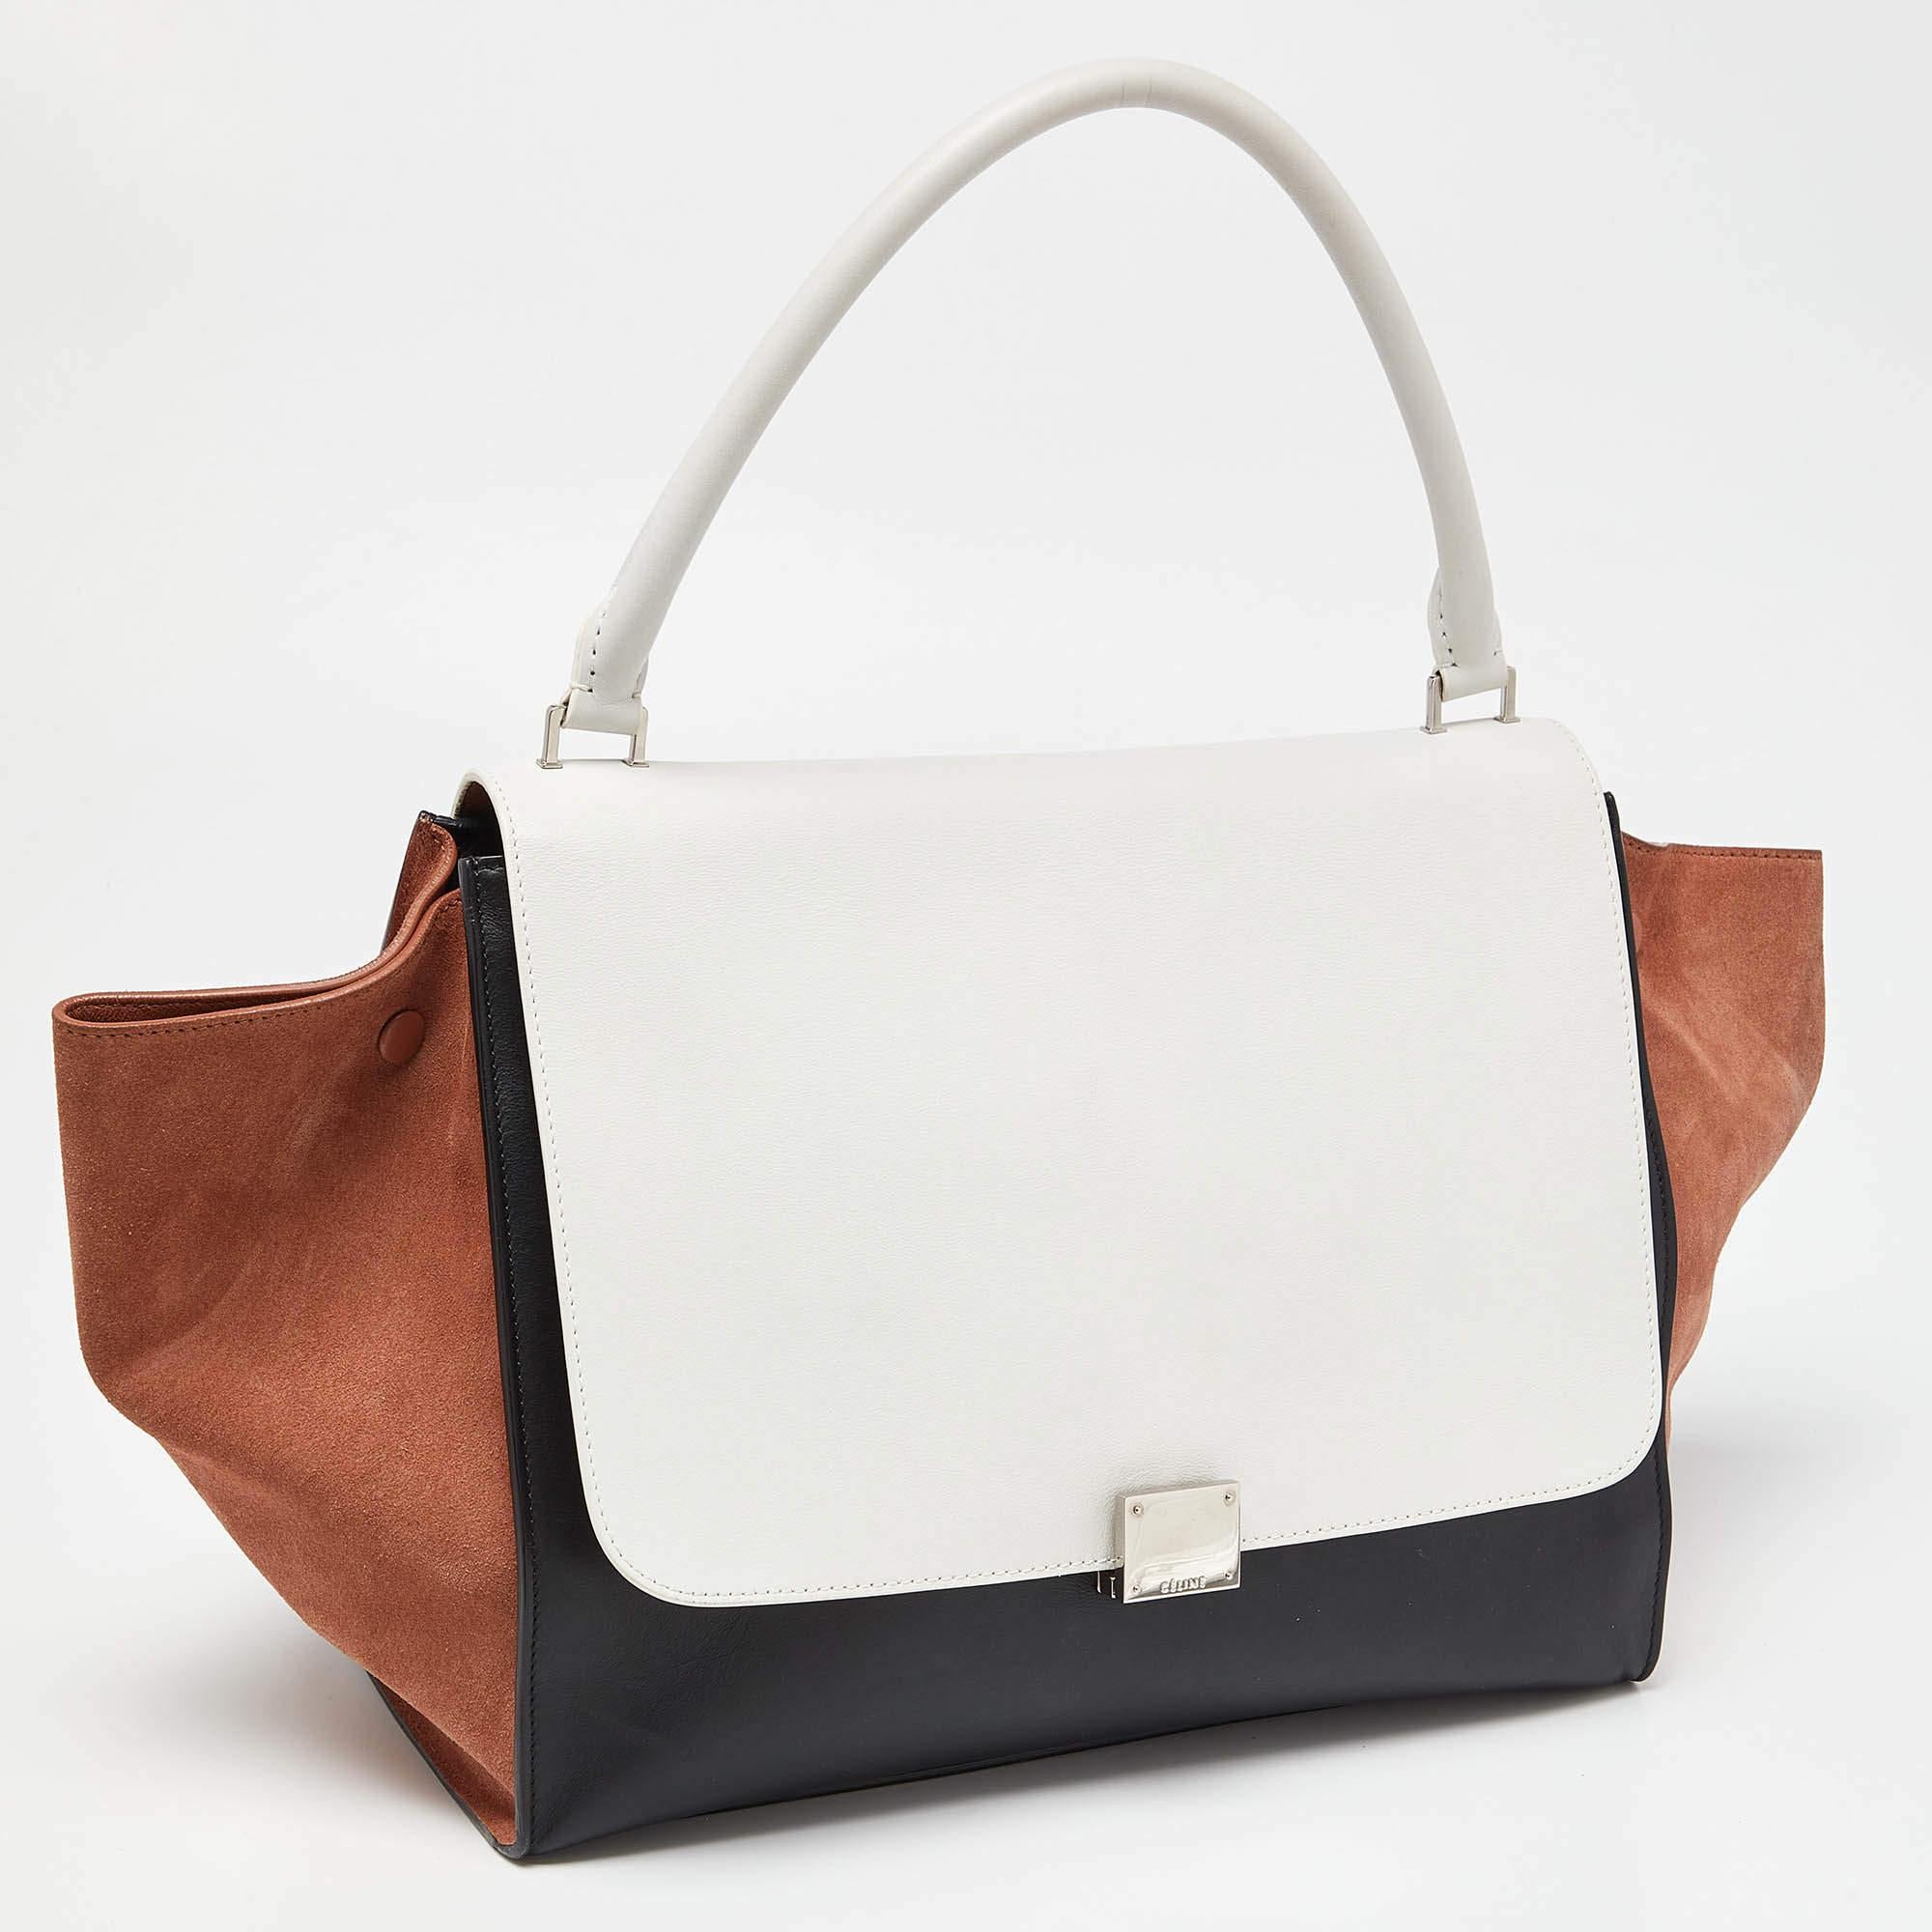 Gray Celine Tricolor Leather and Suede Large Trapeze Top Handle Bag